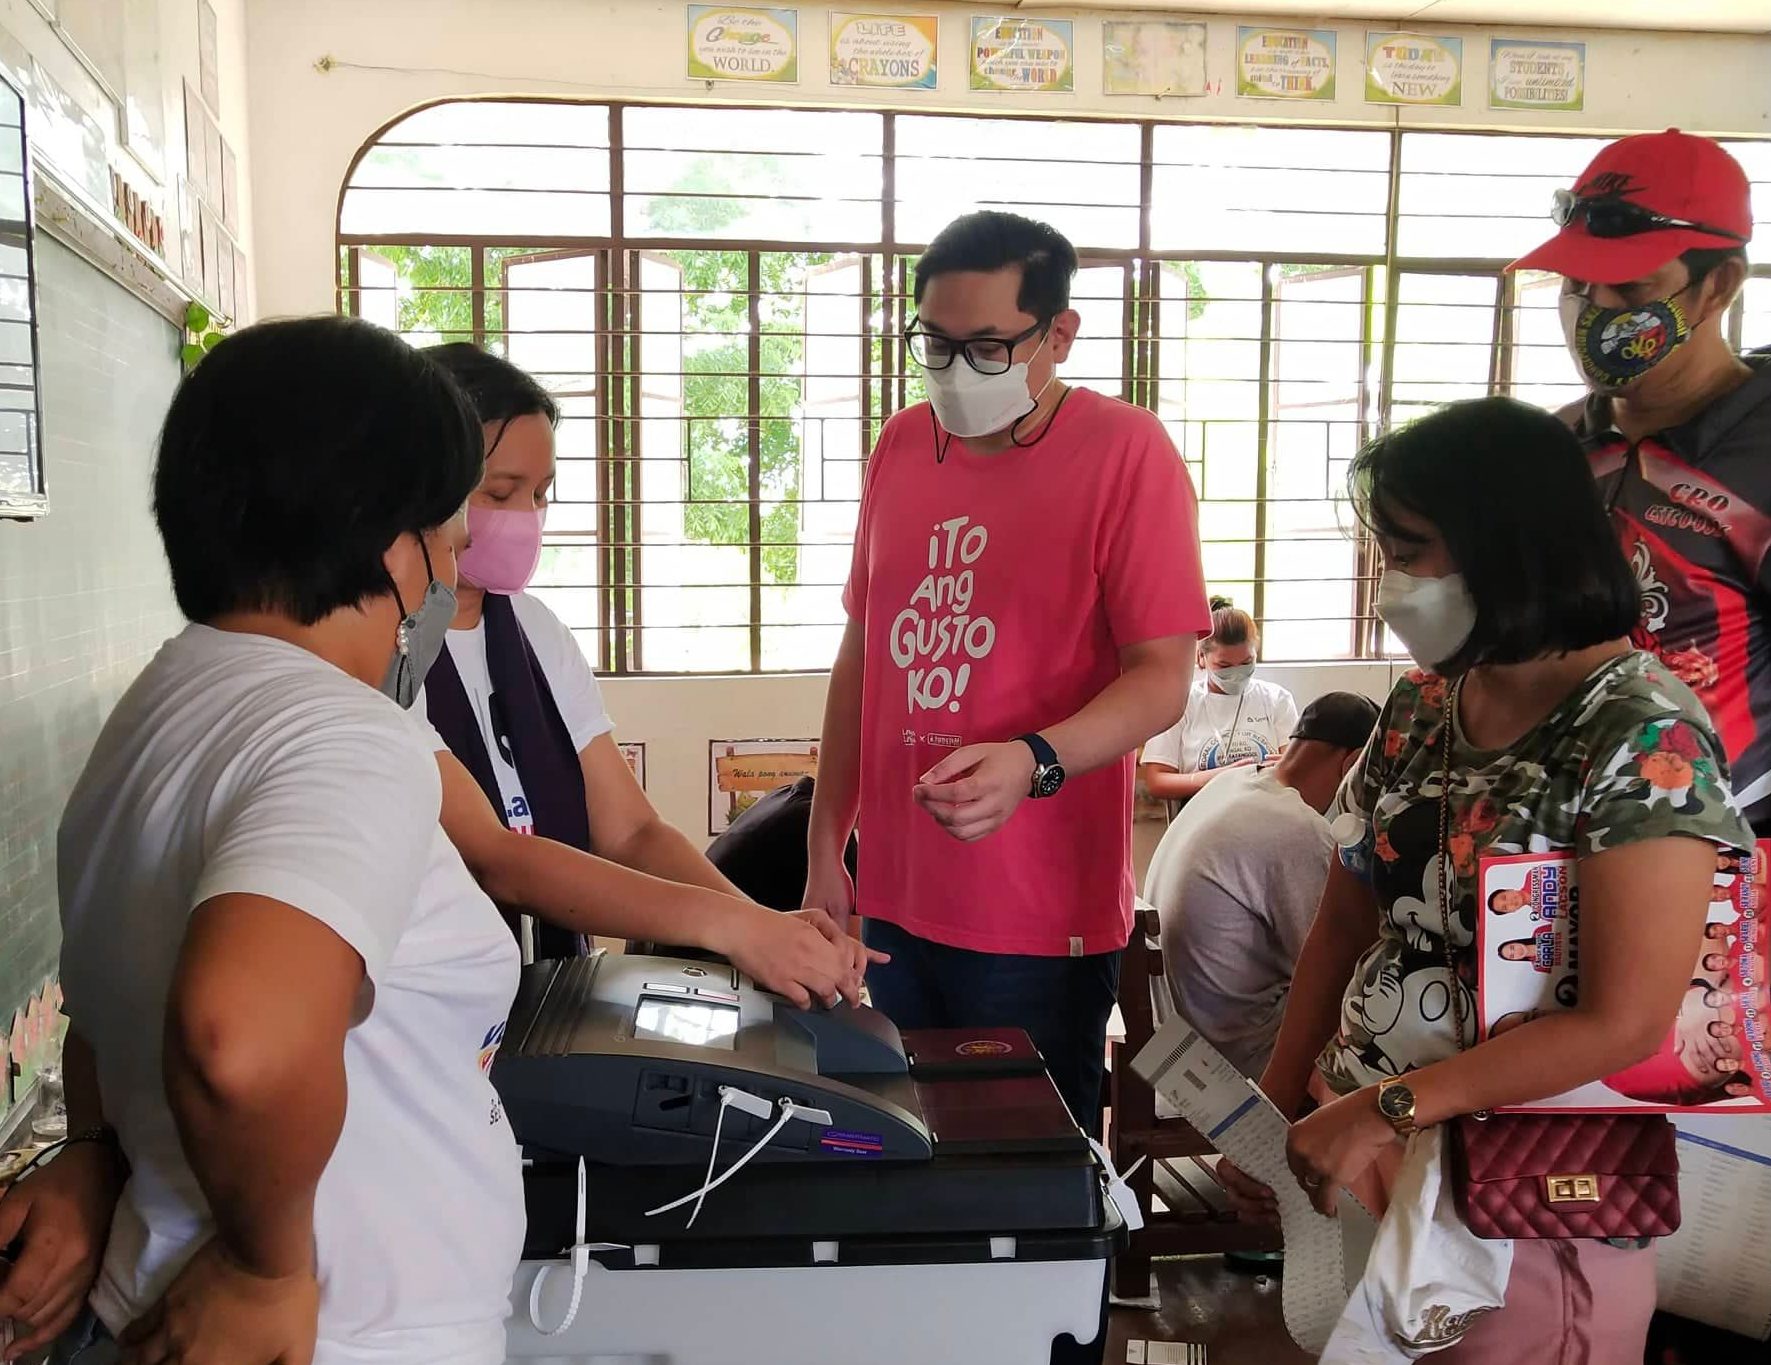 It took only 10 minutes for former senator Bam Aquino to cast his vote after waiting for two hours on Monday in line in Concepcion town, Tarlac province